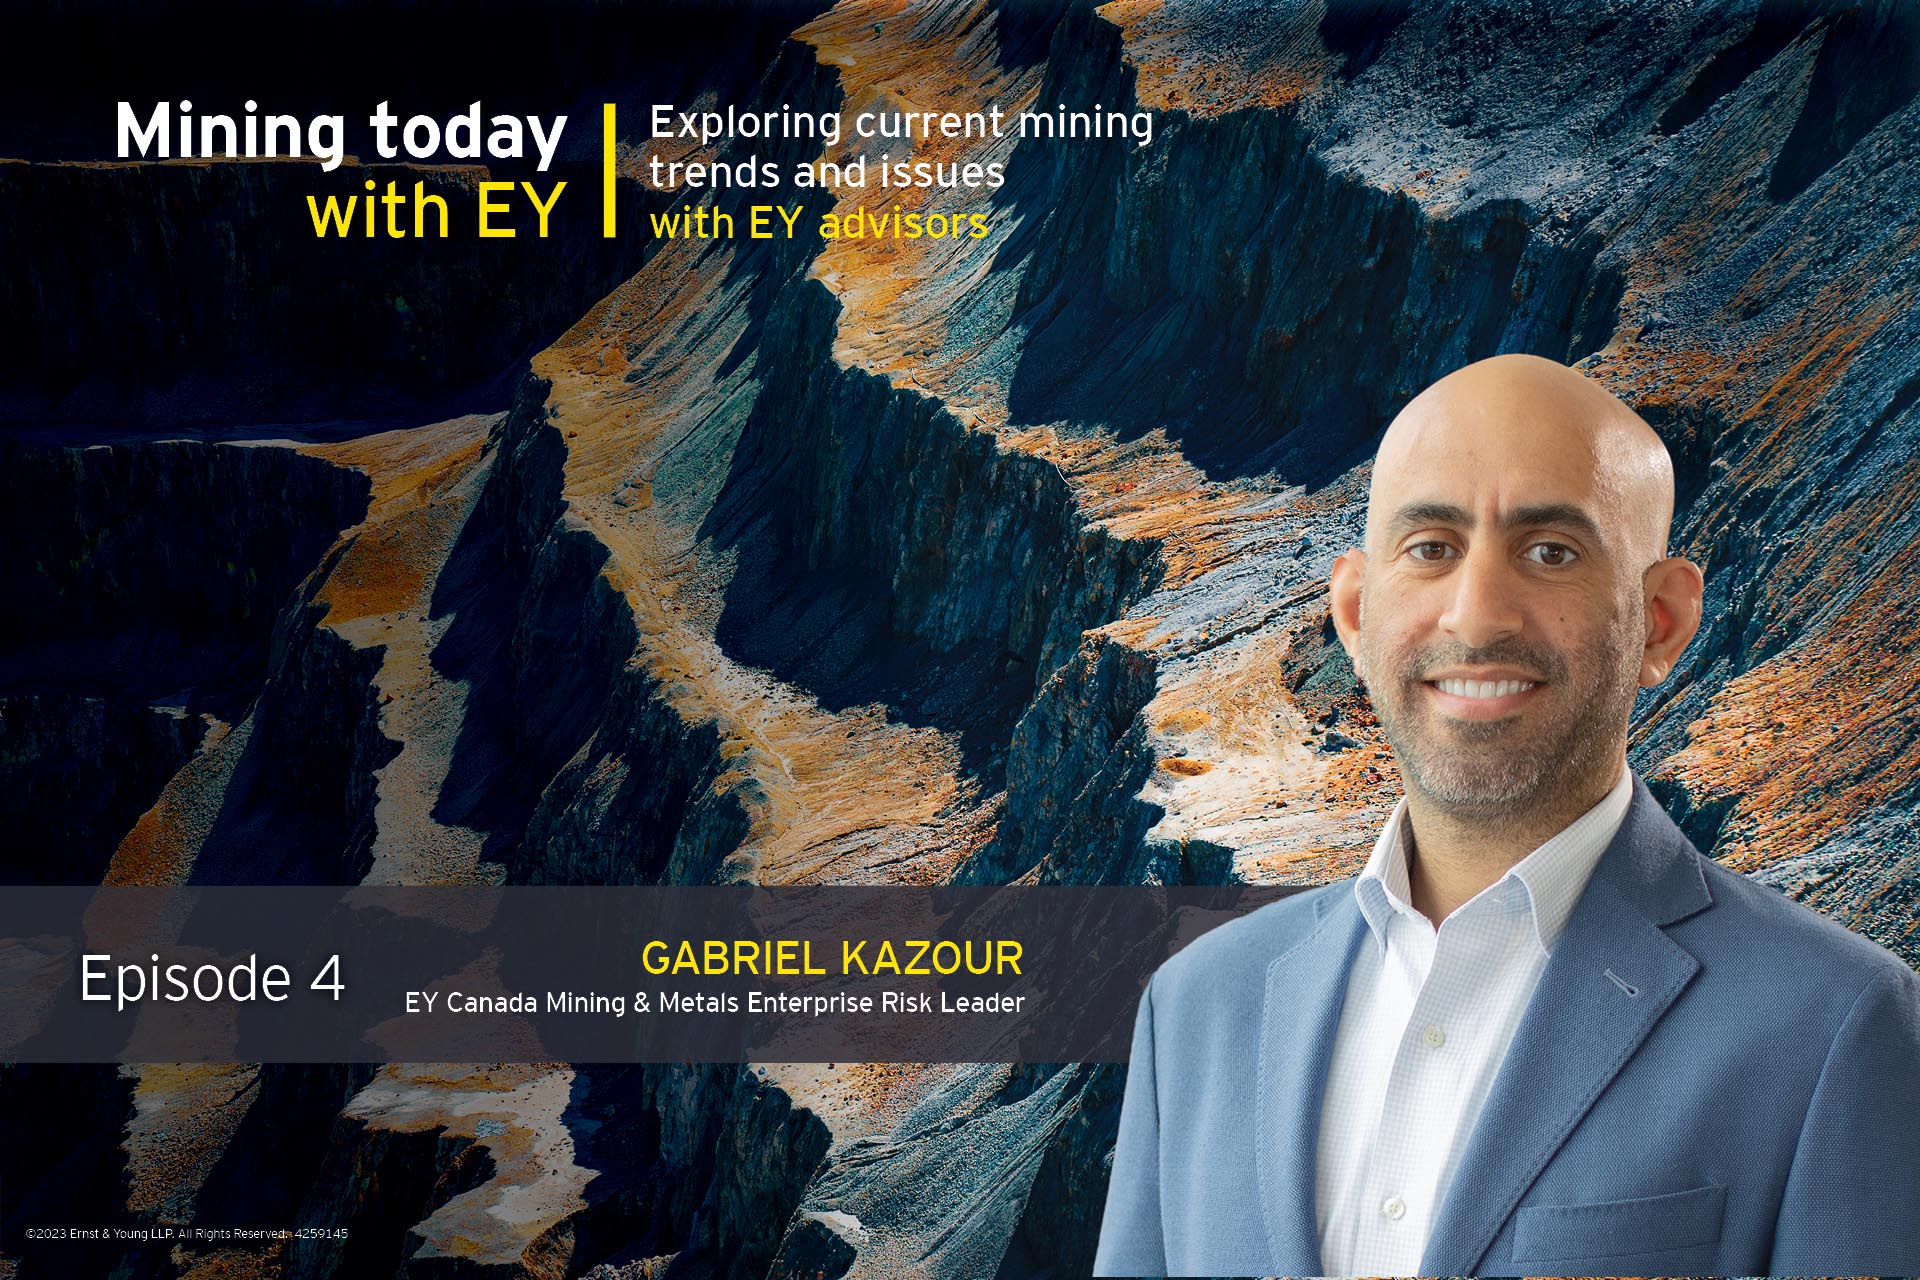 Mining today with EY – EP 4: Enterprise risk management in mining and metals